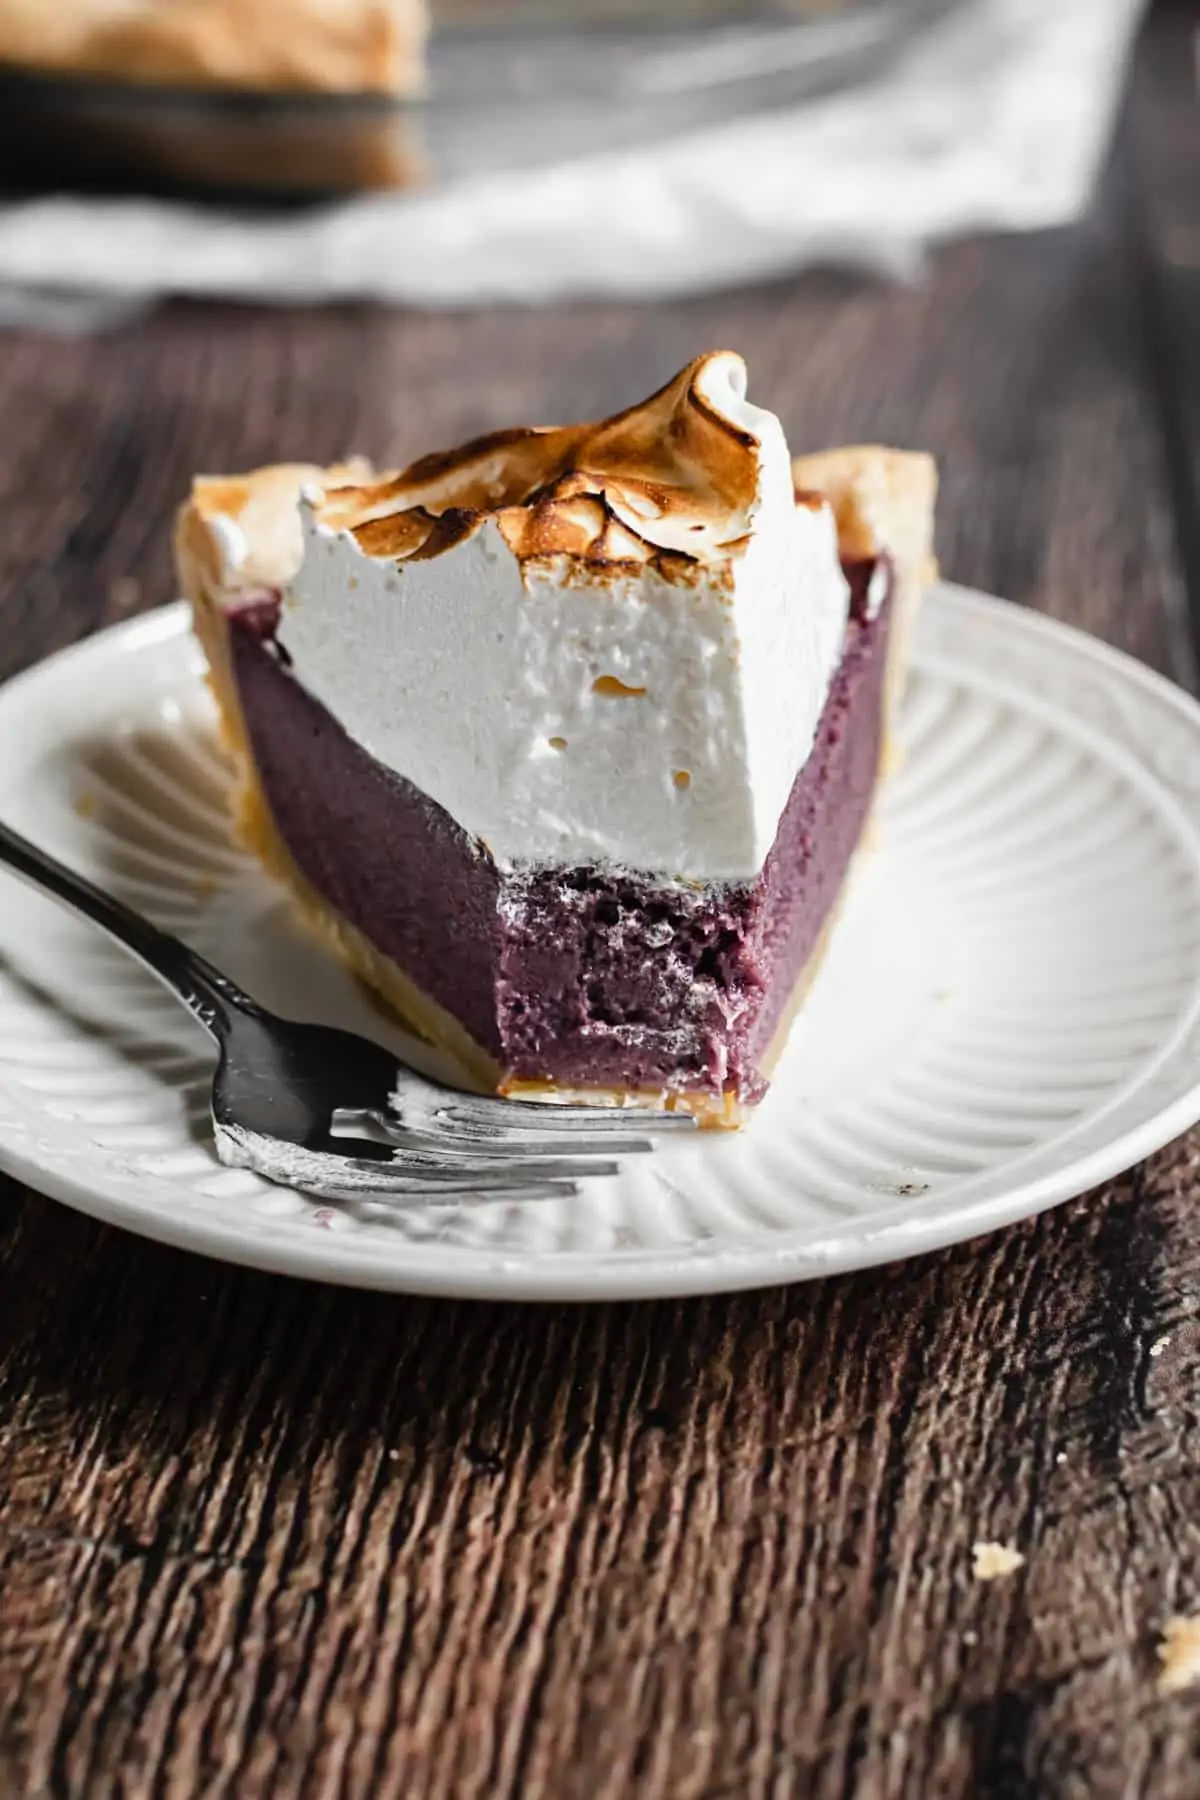 One slice of purple sweet potato pie on a plate with a bite removed